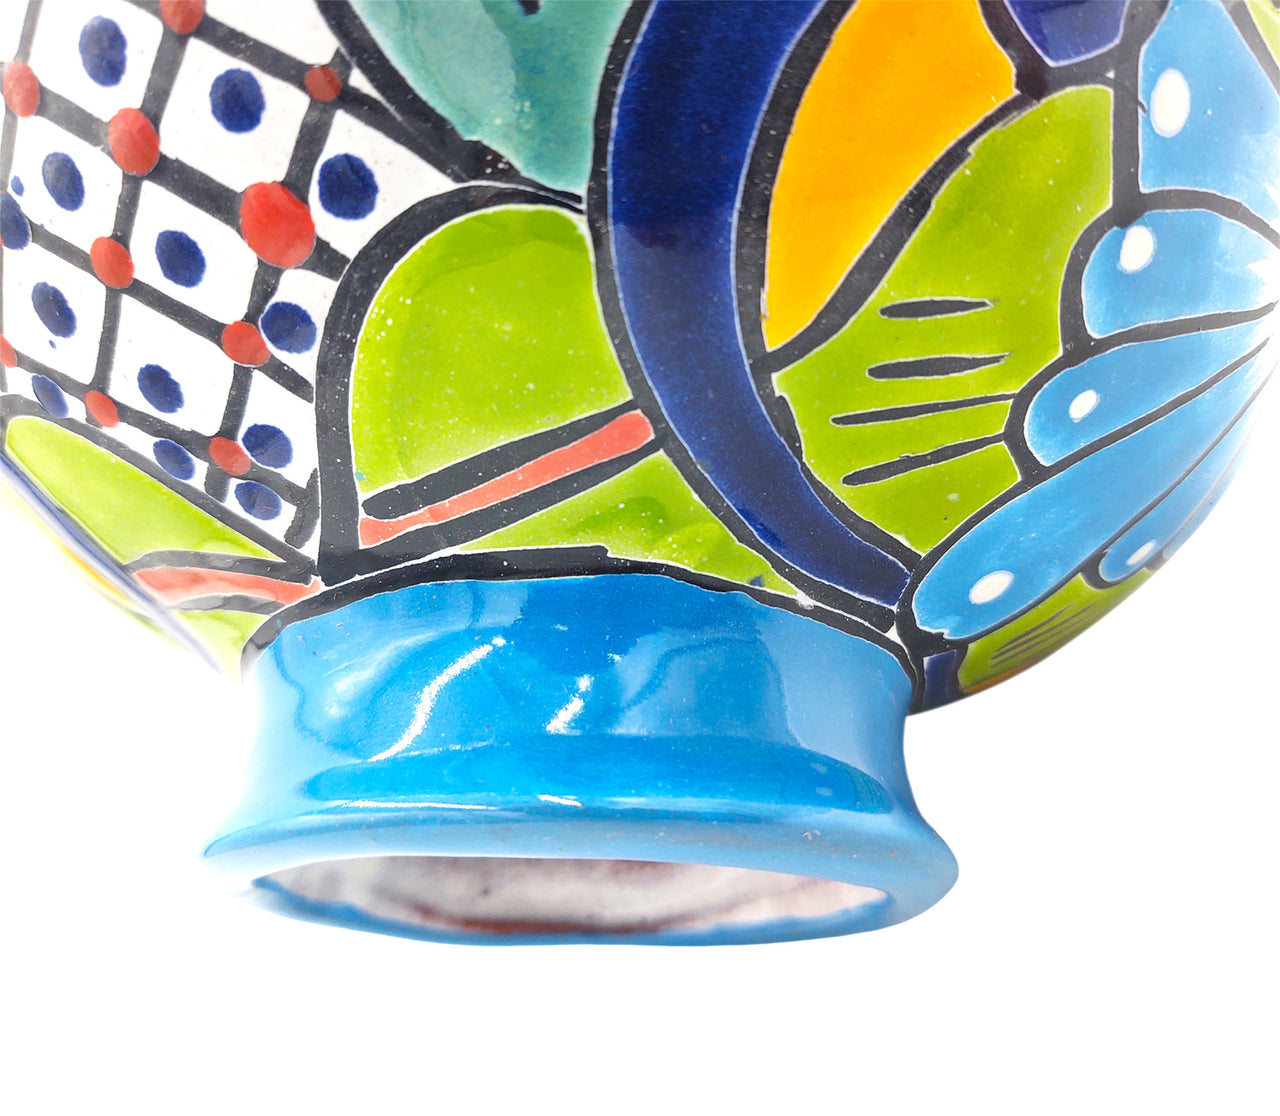 Mexican Talavera Hand Painted Flower Vase - Traditional Mexican Decorative Florero for Home Décor With Light Blue Trim